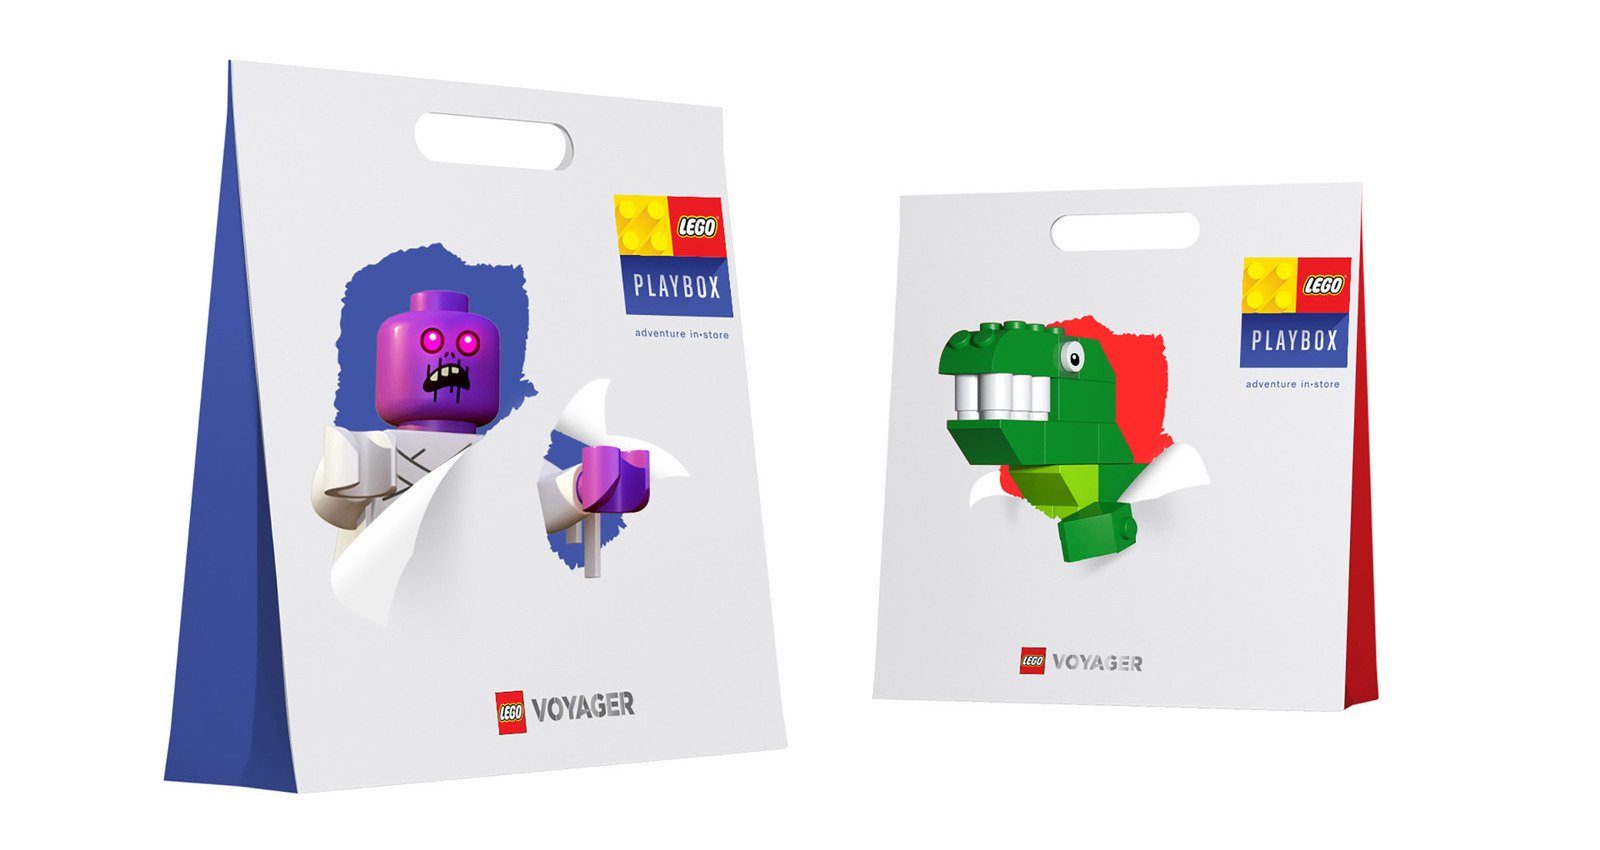 Lego PLaybox Collateral Design